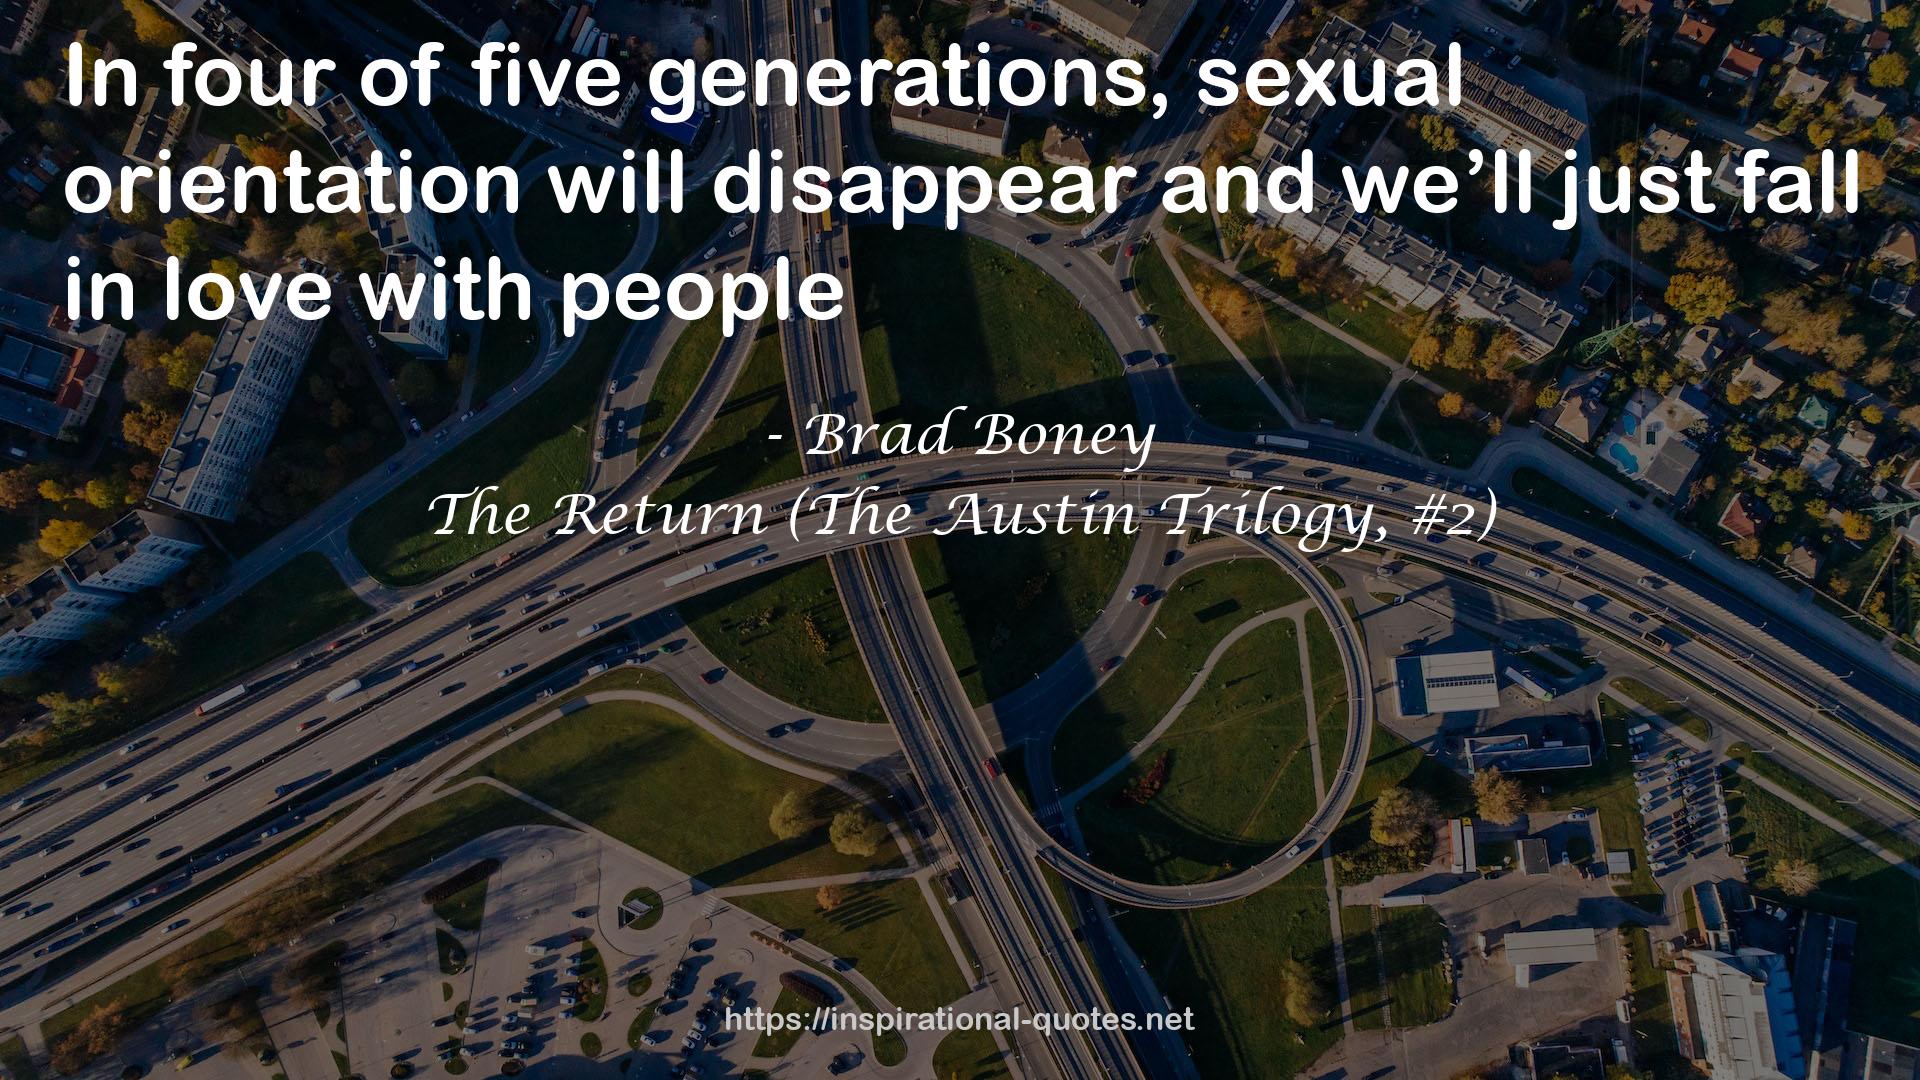 The Return (The Austin Trilogy, #2) QUOTES